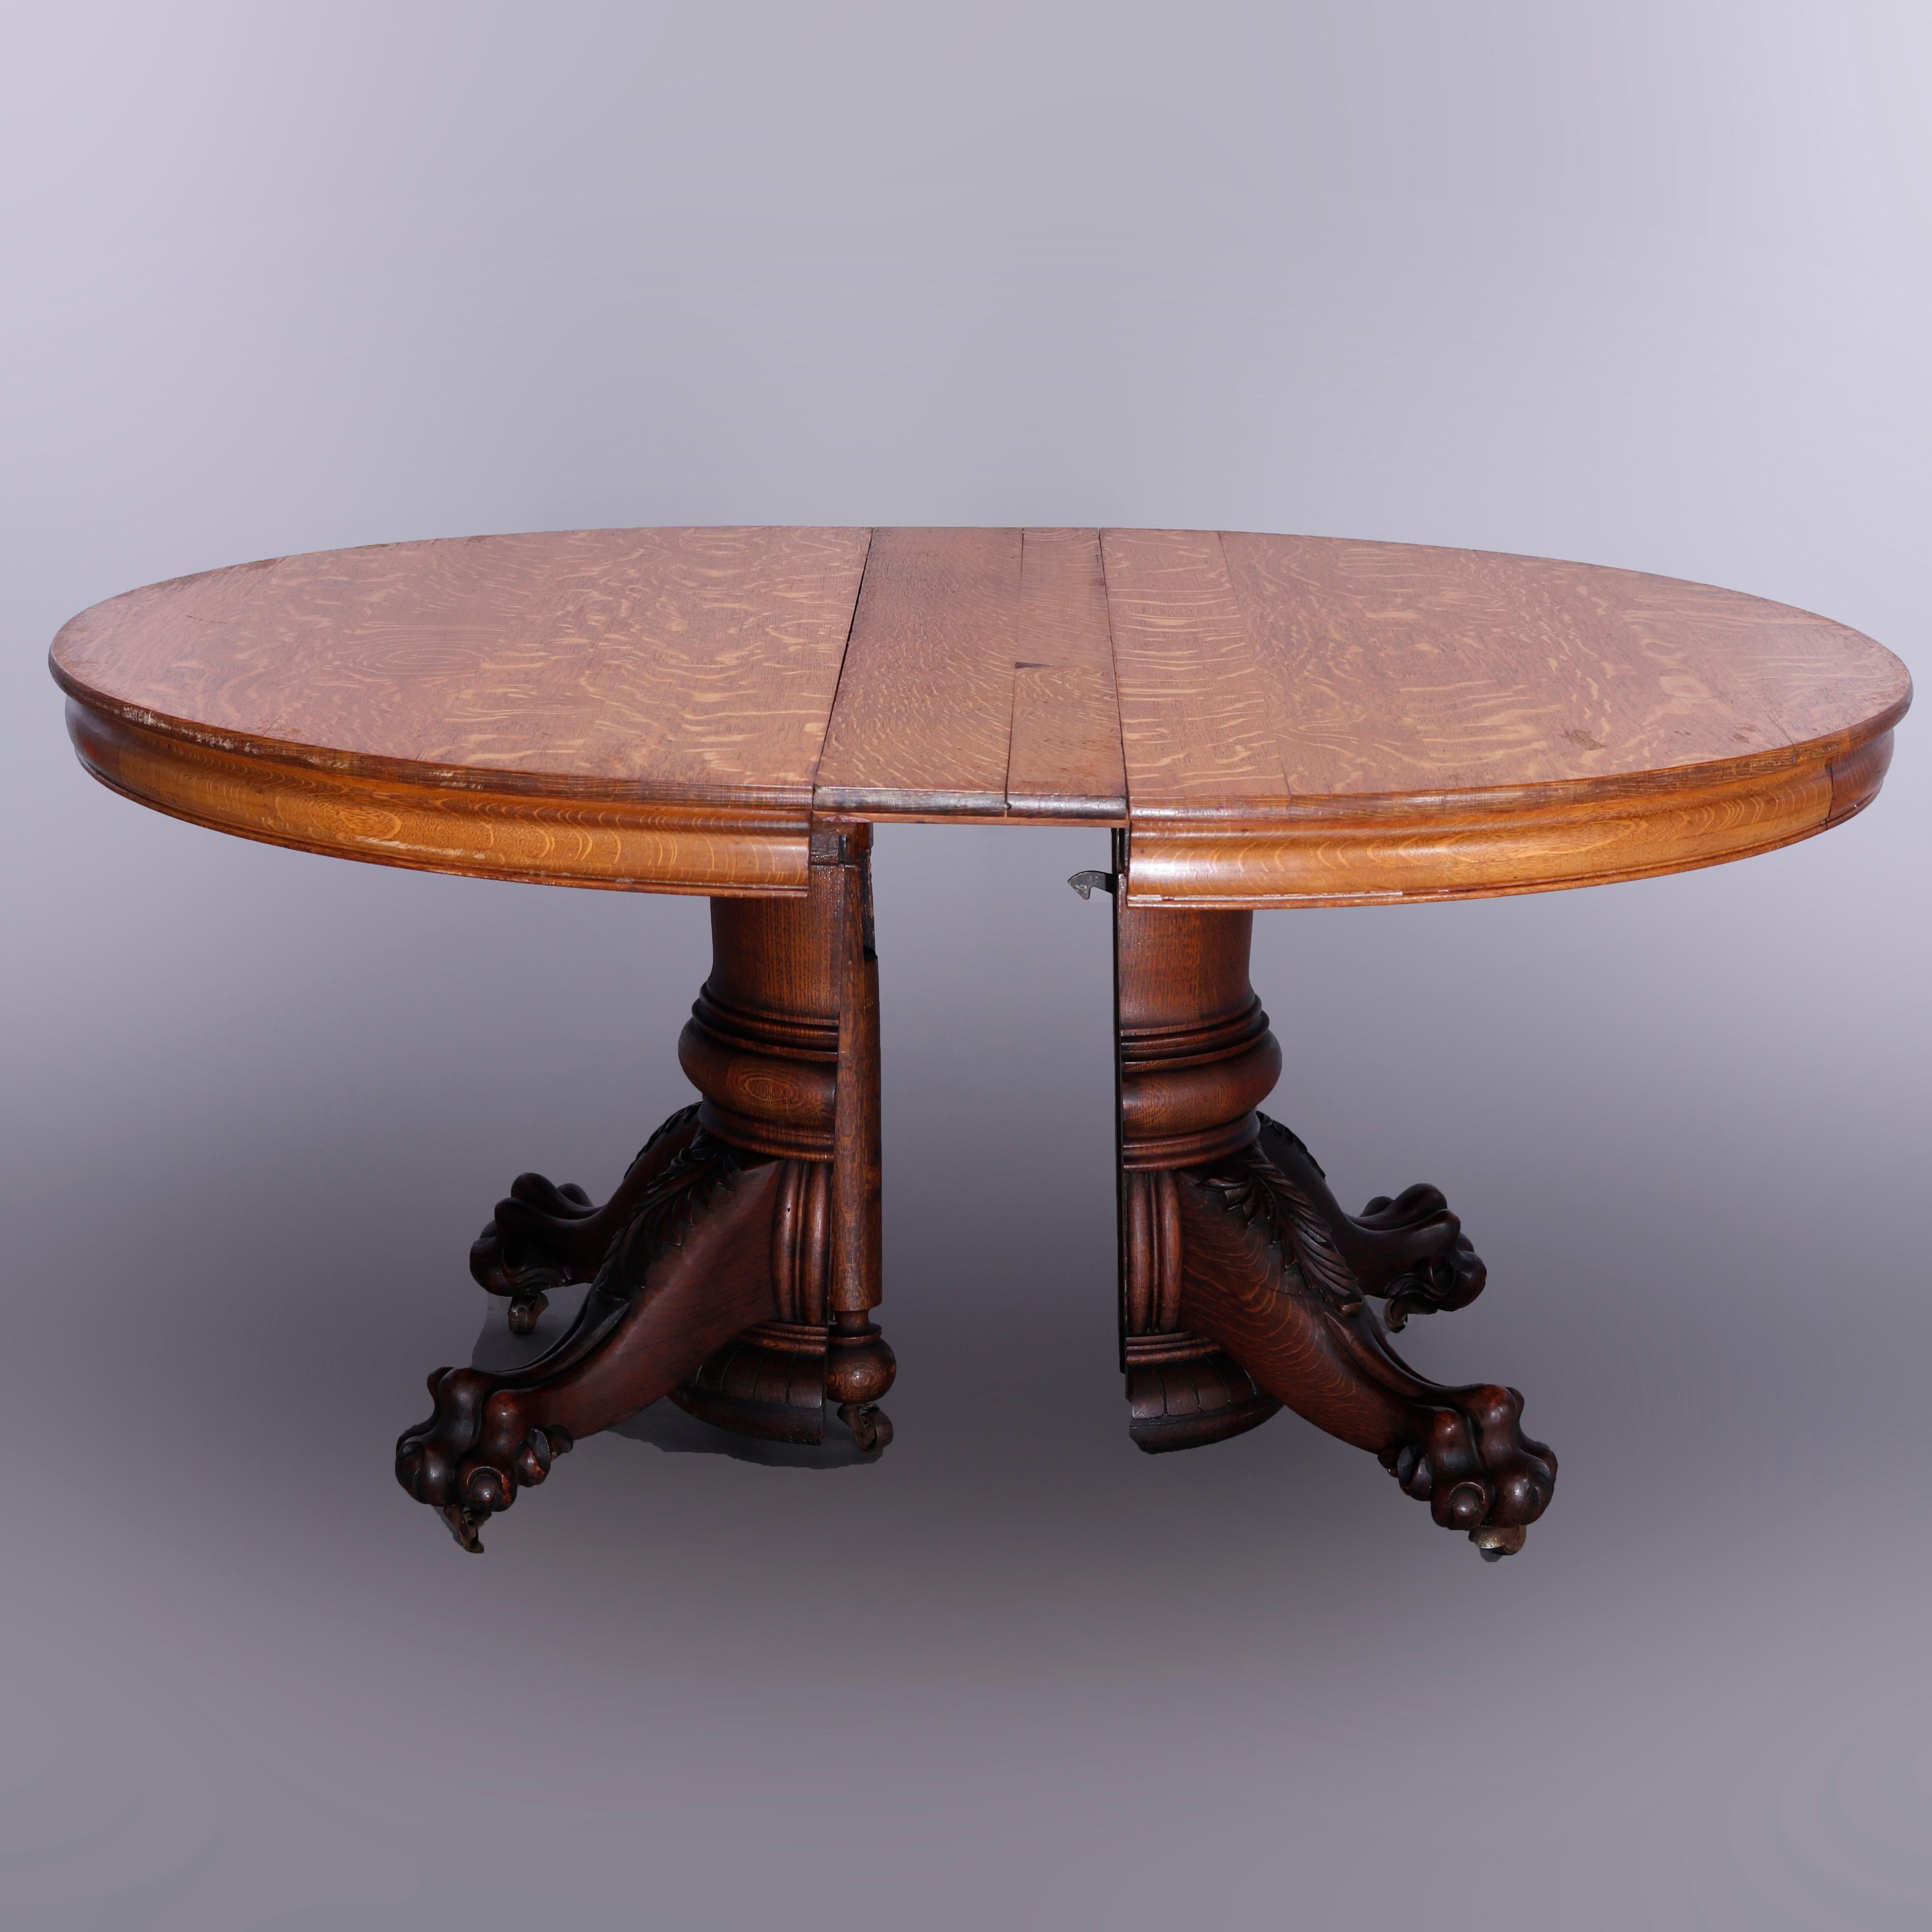 American AntiqueHastings Round Oak Carved Claw Foot Banquet Dining Table & 5 Leaves c1910